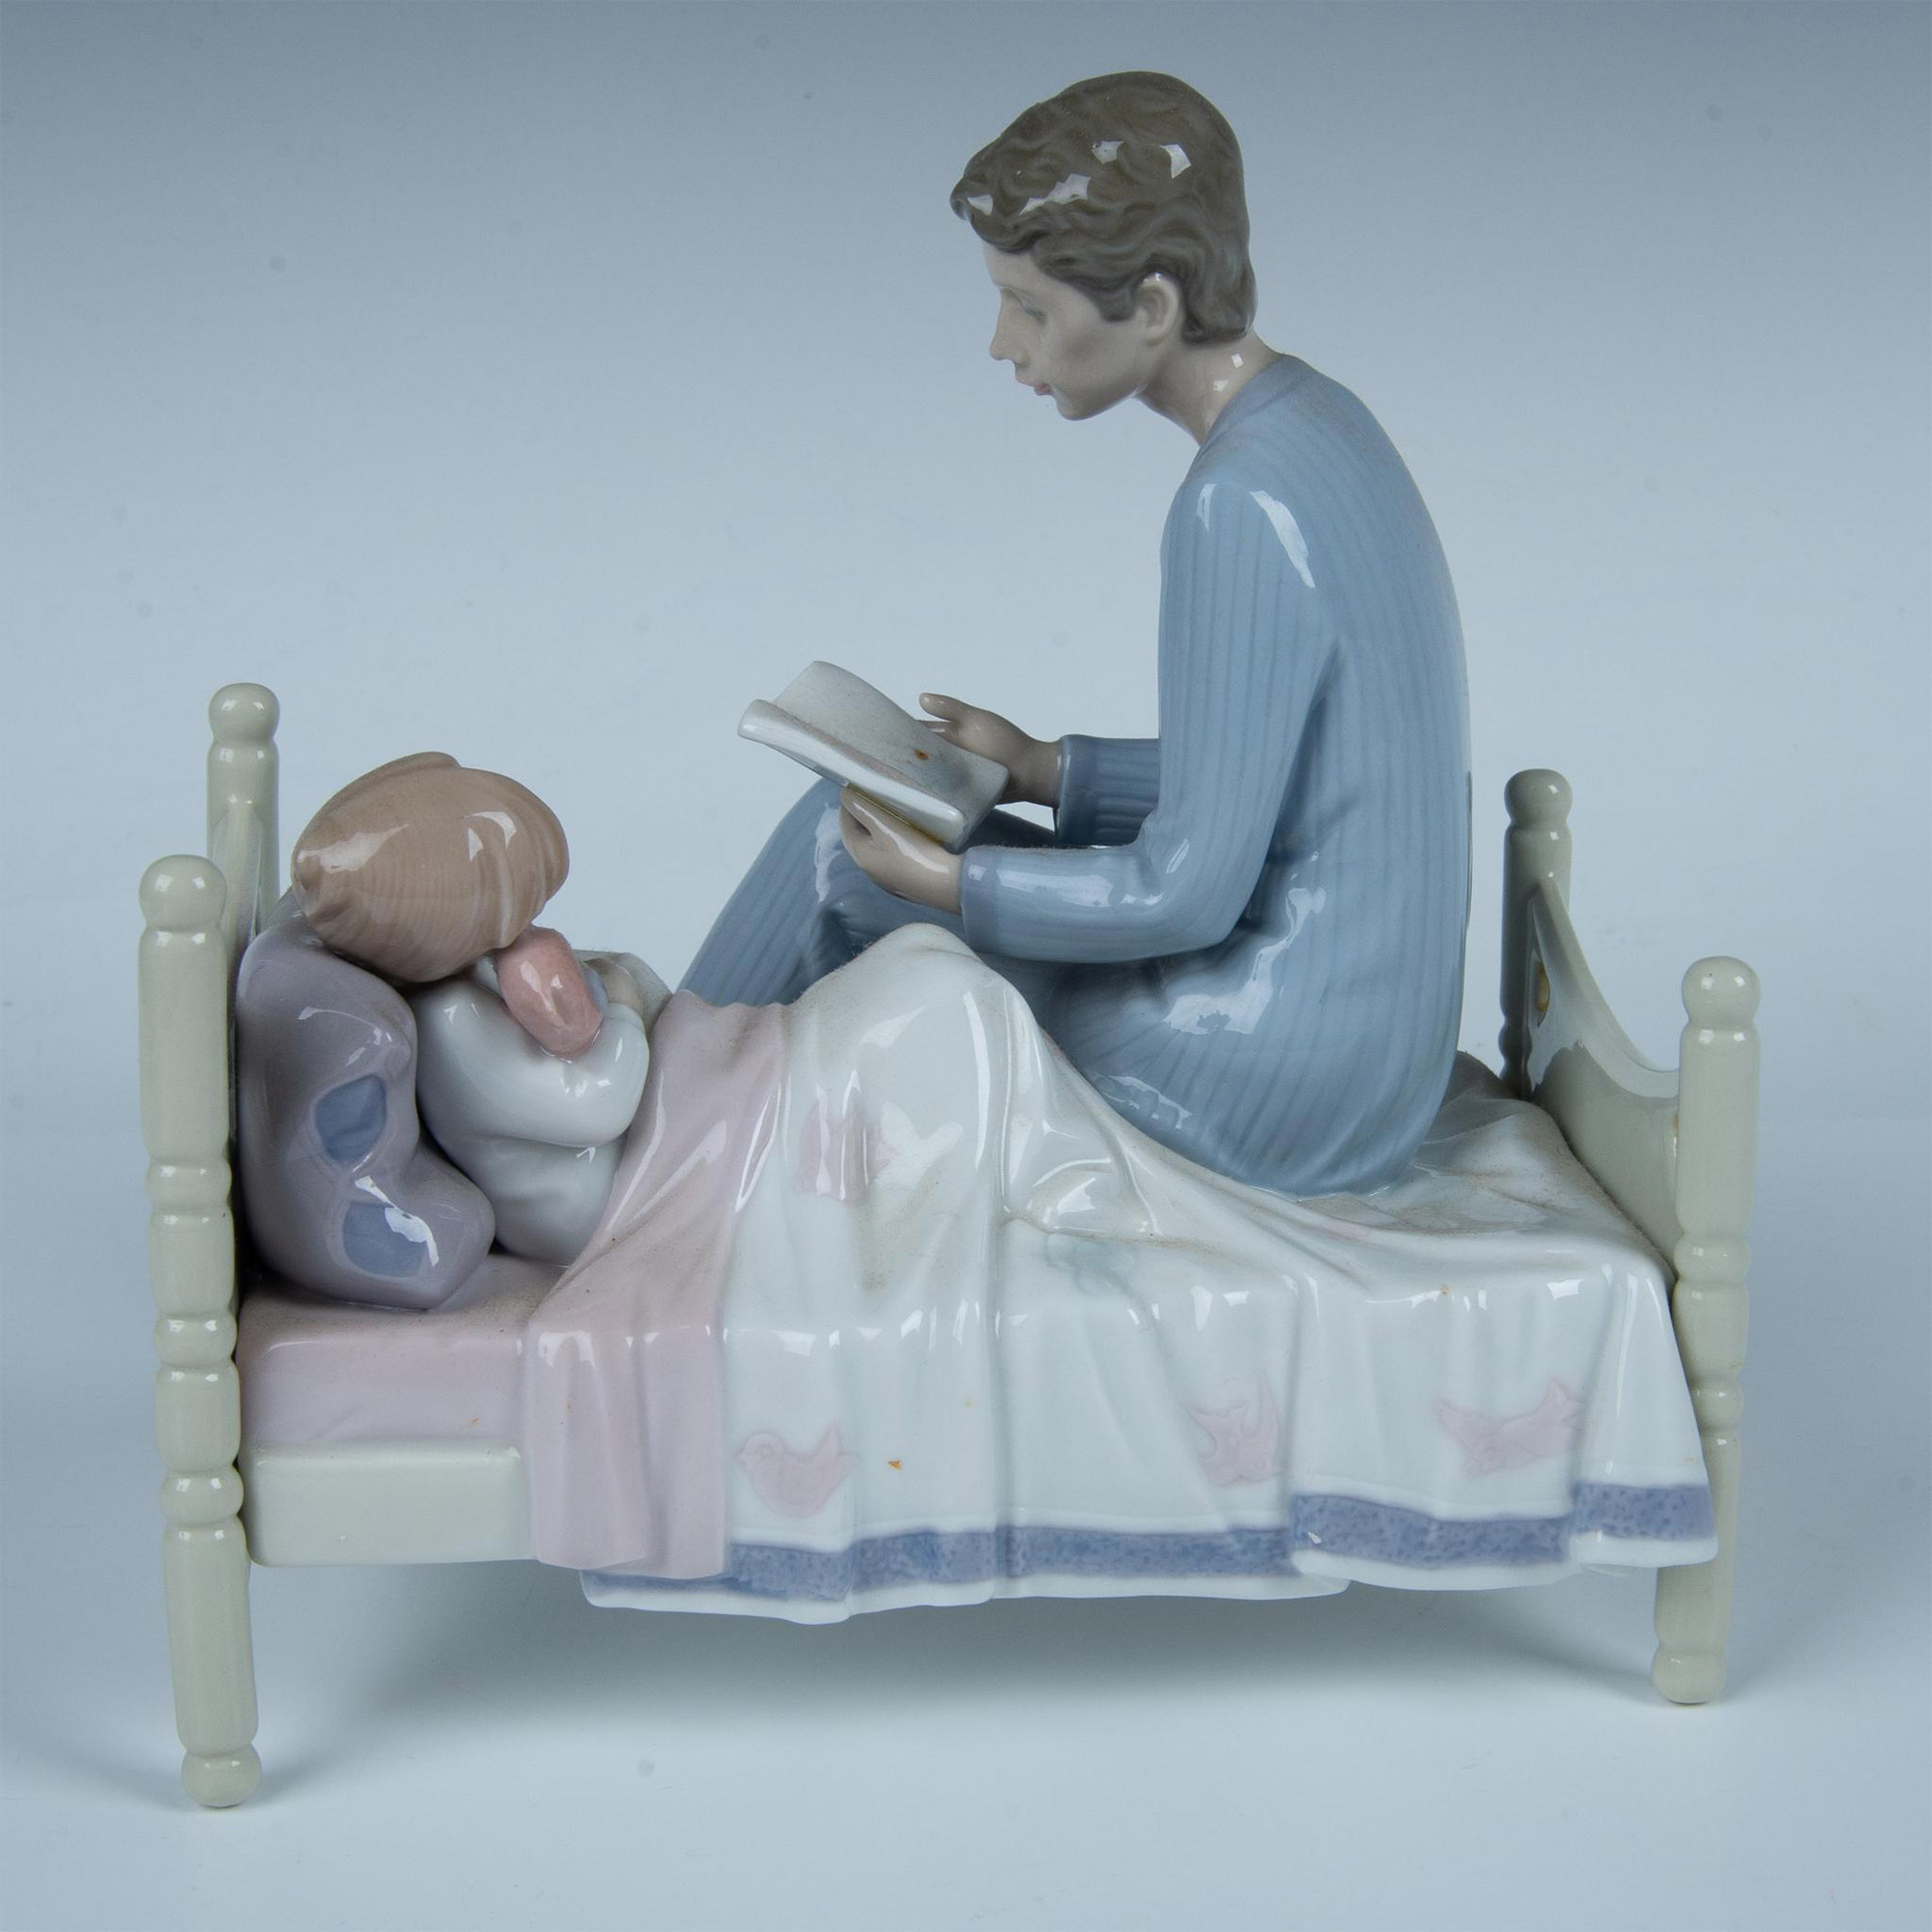 Just One More 1005899 - Lladro Porcelain Figurine - Image 2 of 9